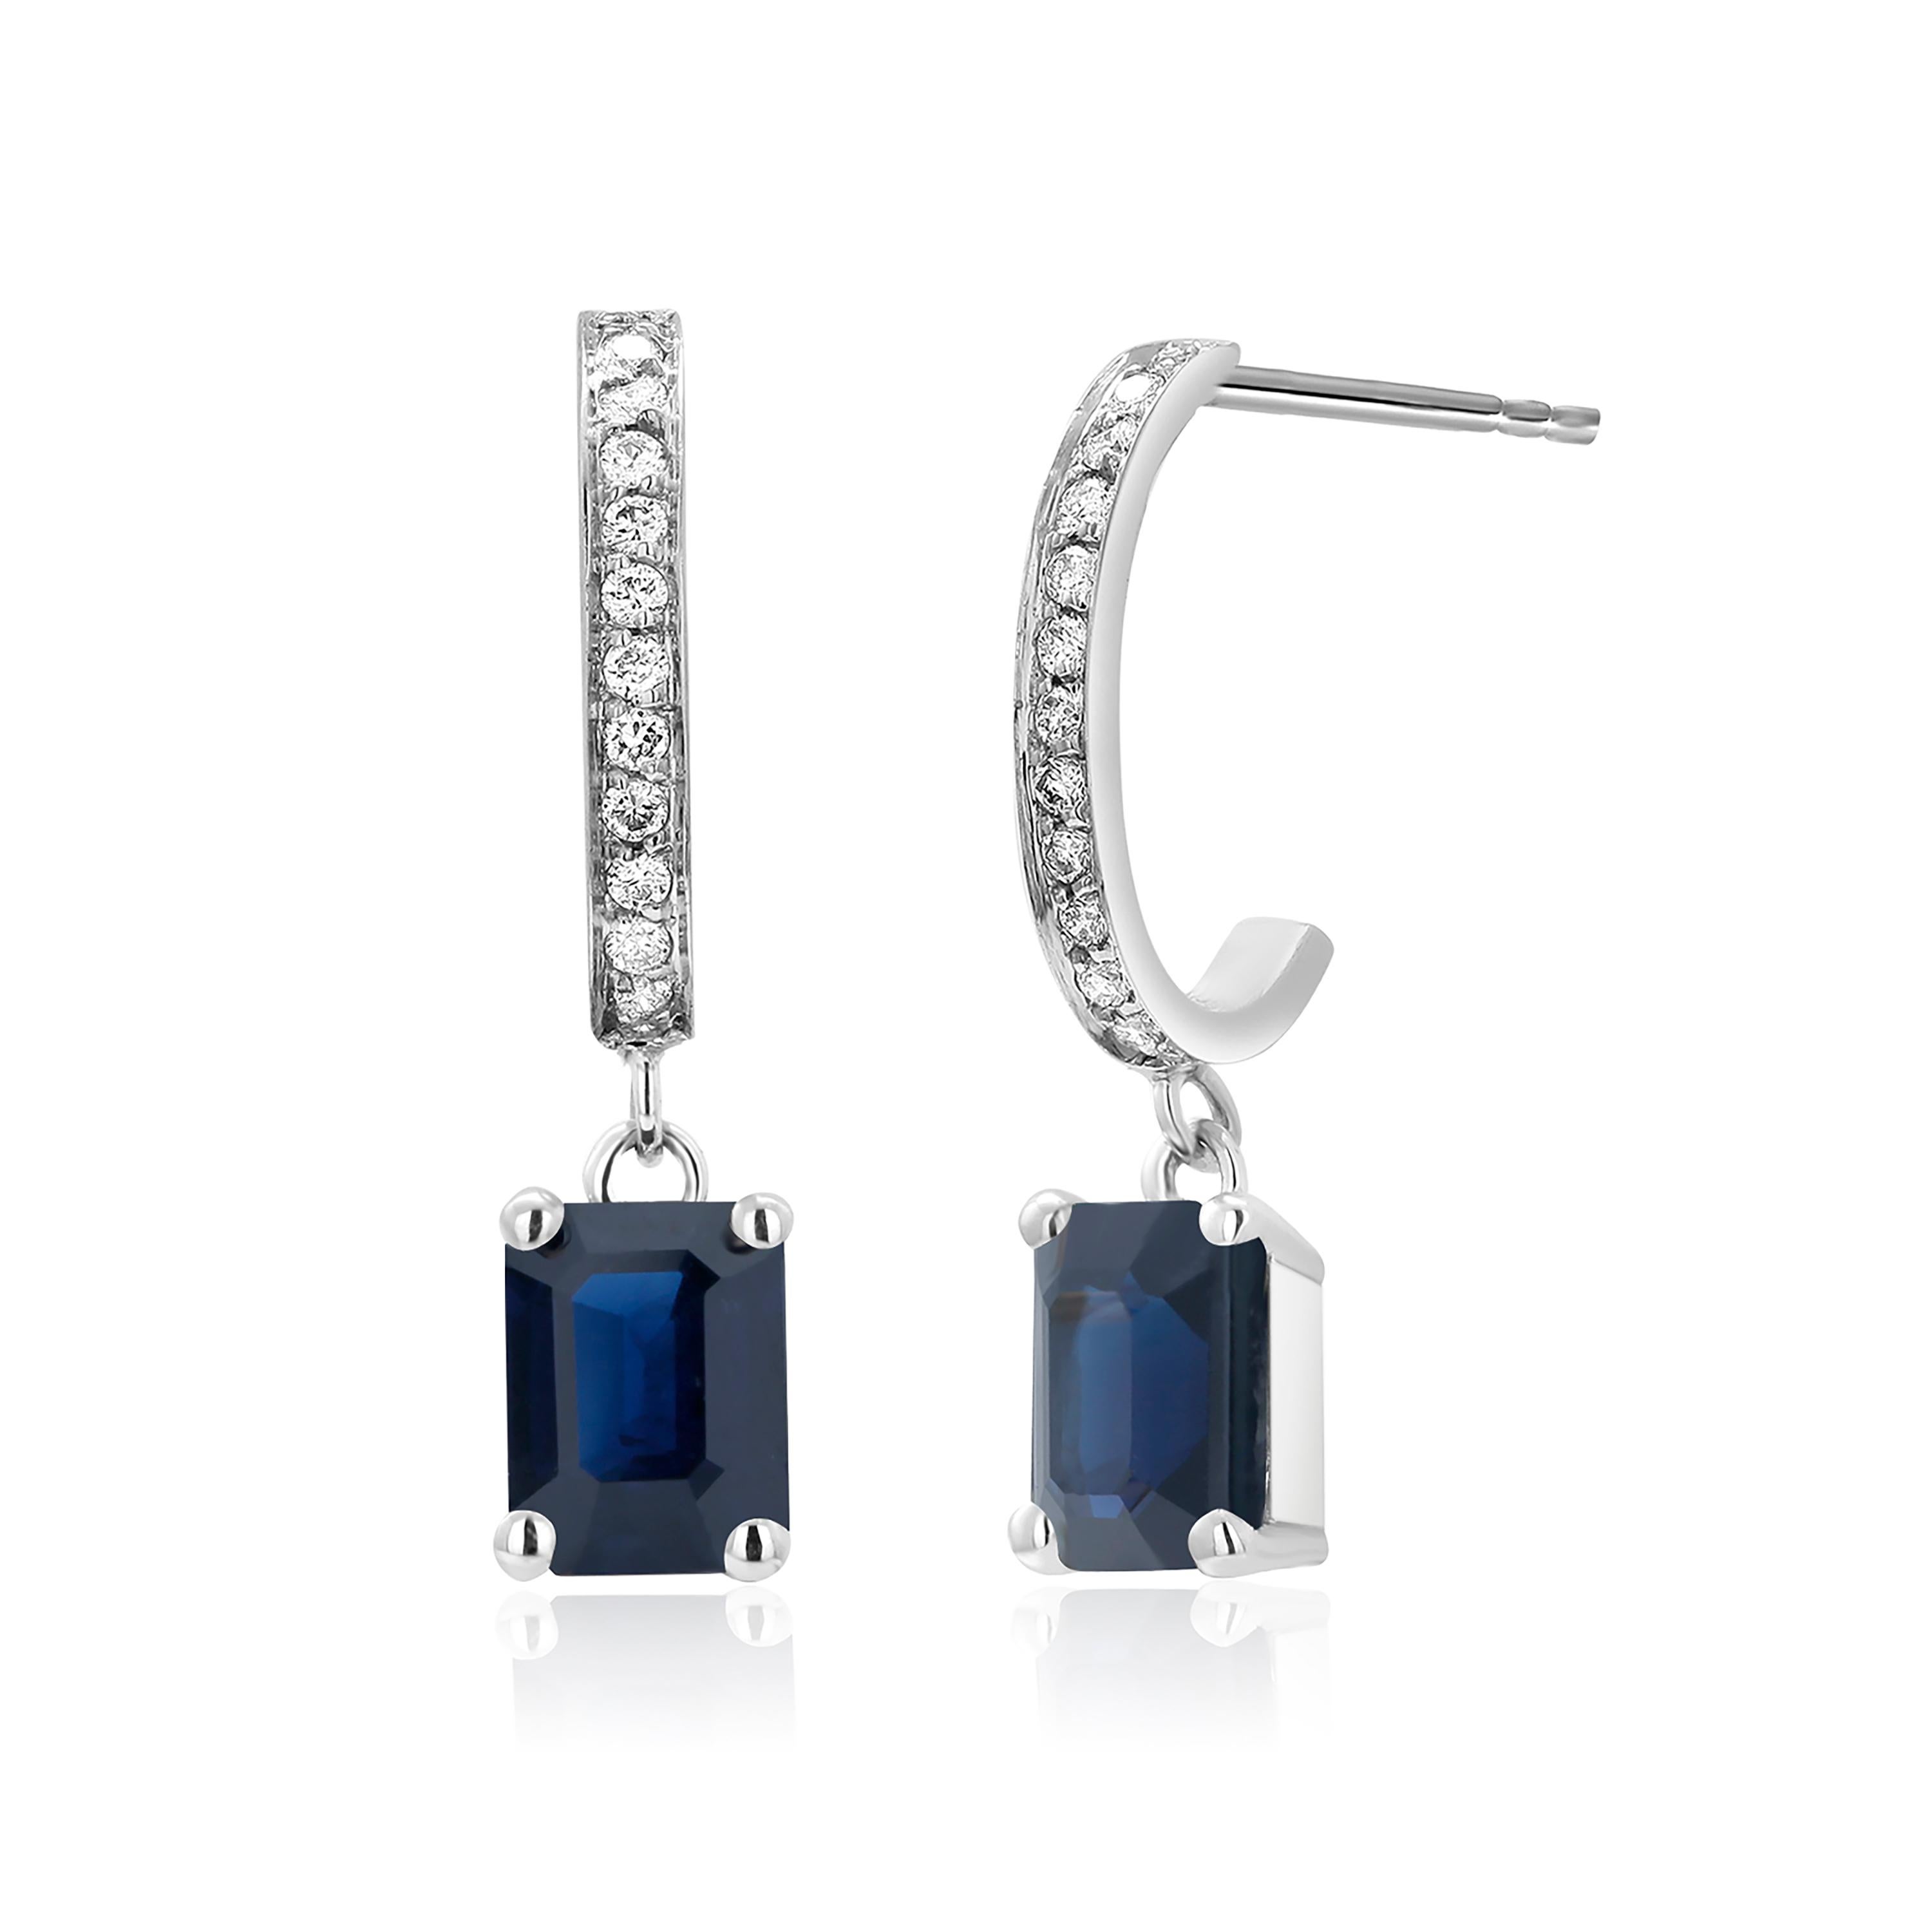 Fourteen karats white gold drop hoop earrings 
Round diamonds weighing 0.25 carats 
Two matched emerald-shaped blue sapphires weighing 2.00 carat
Sapphires are of royal blue hue
New Earrings
Handmade in the USA
The 14 karat gold earrings are hanging